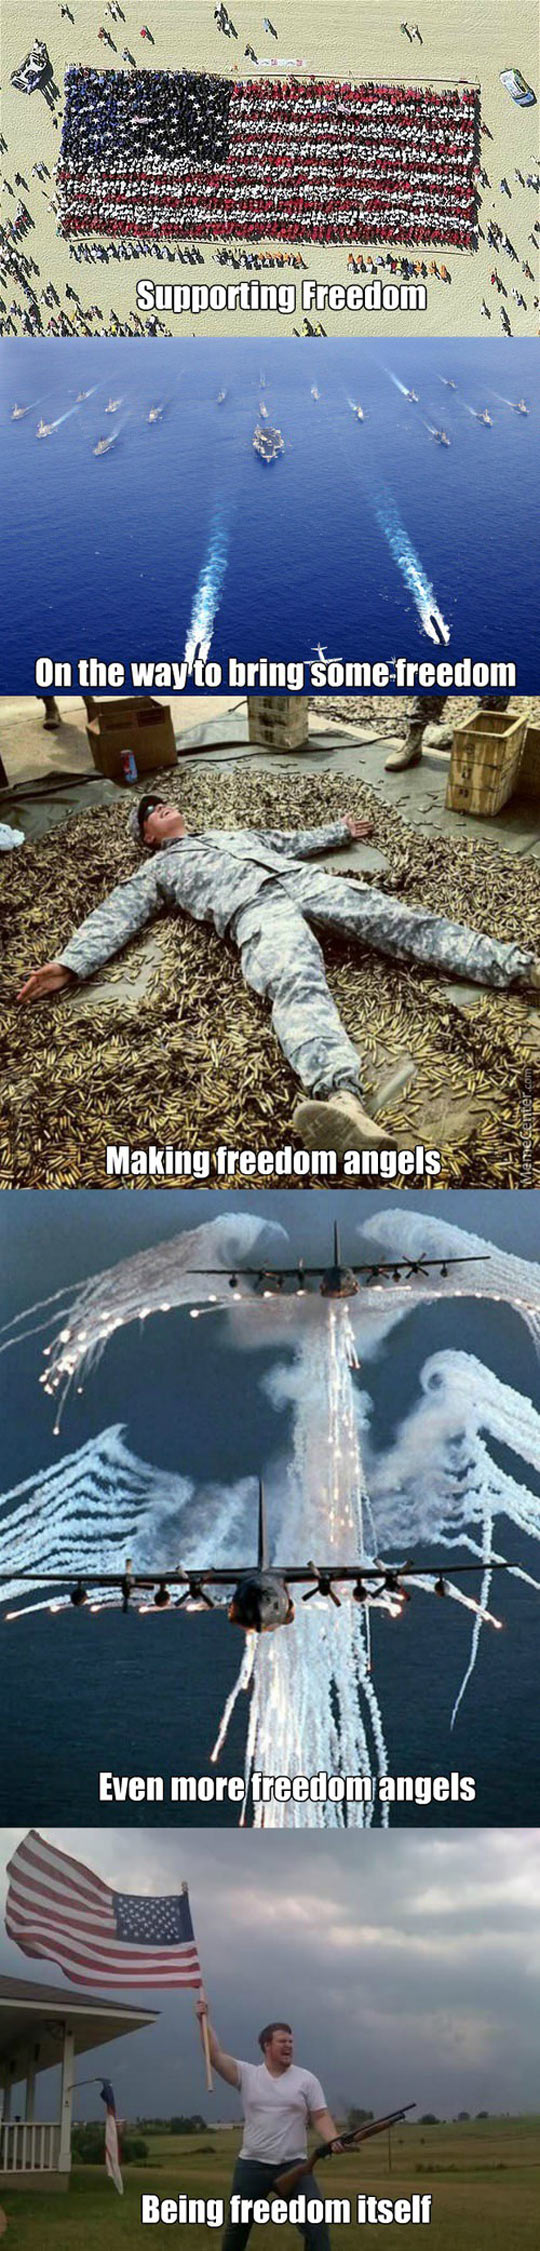 All the freedoms!